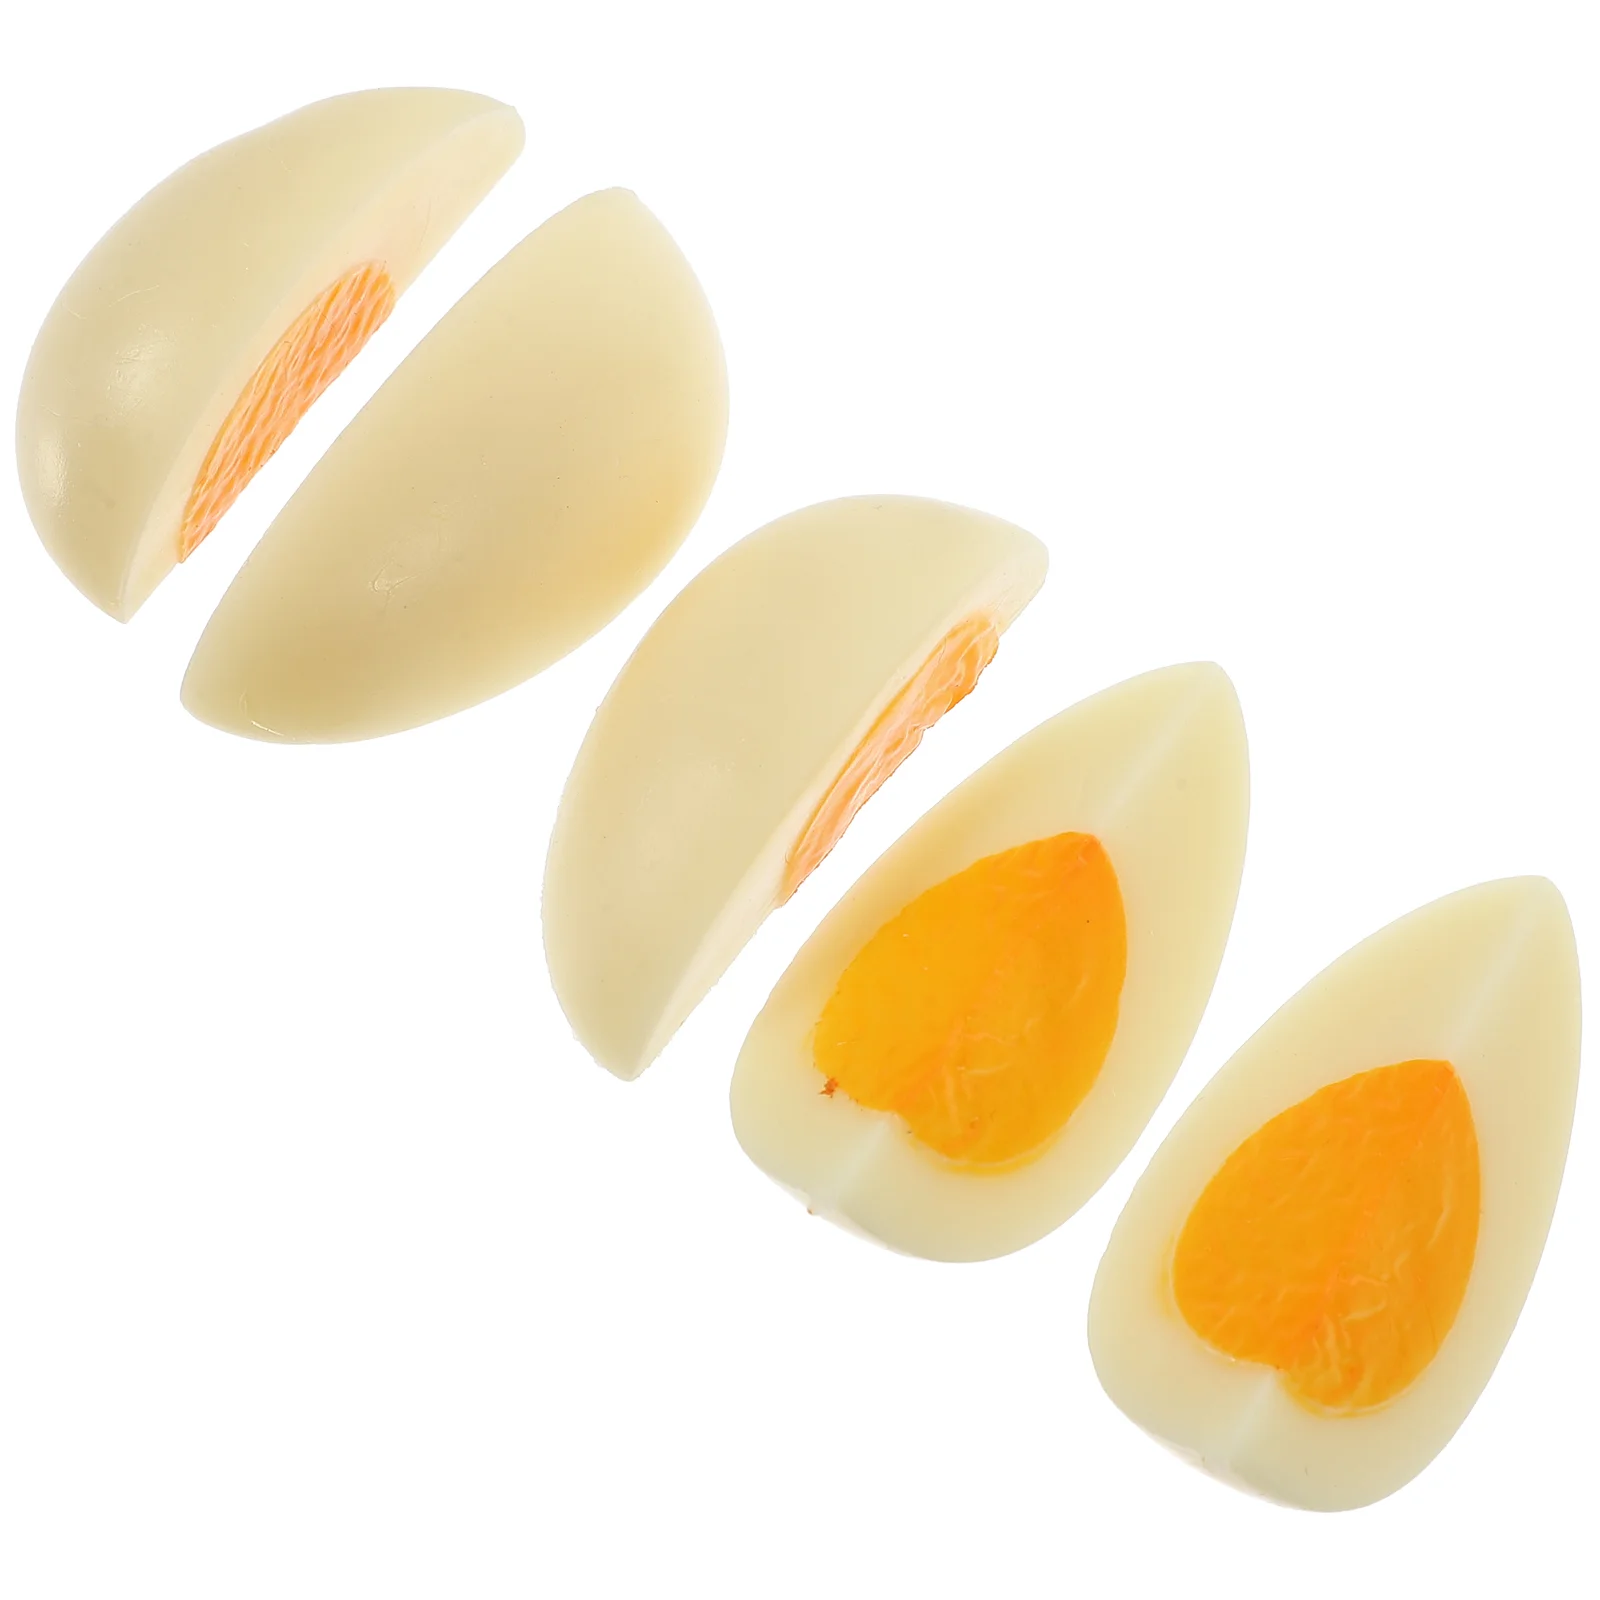 

5 Pcs Simulated Boiled Eggs House Decorations Home Artificial Models Kitchen Decir Fake Slices Pvc Prop Food